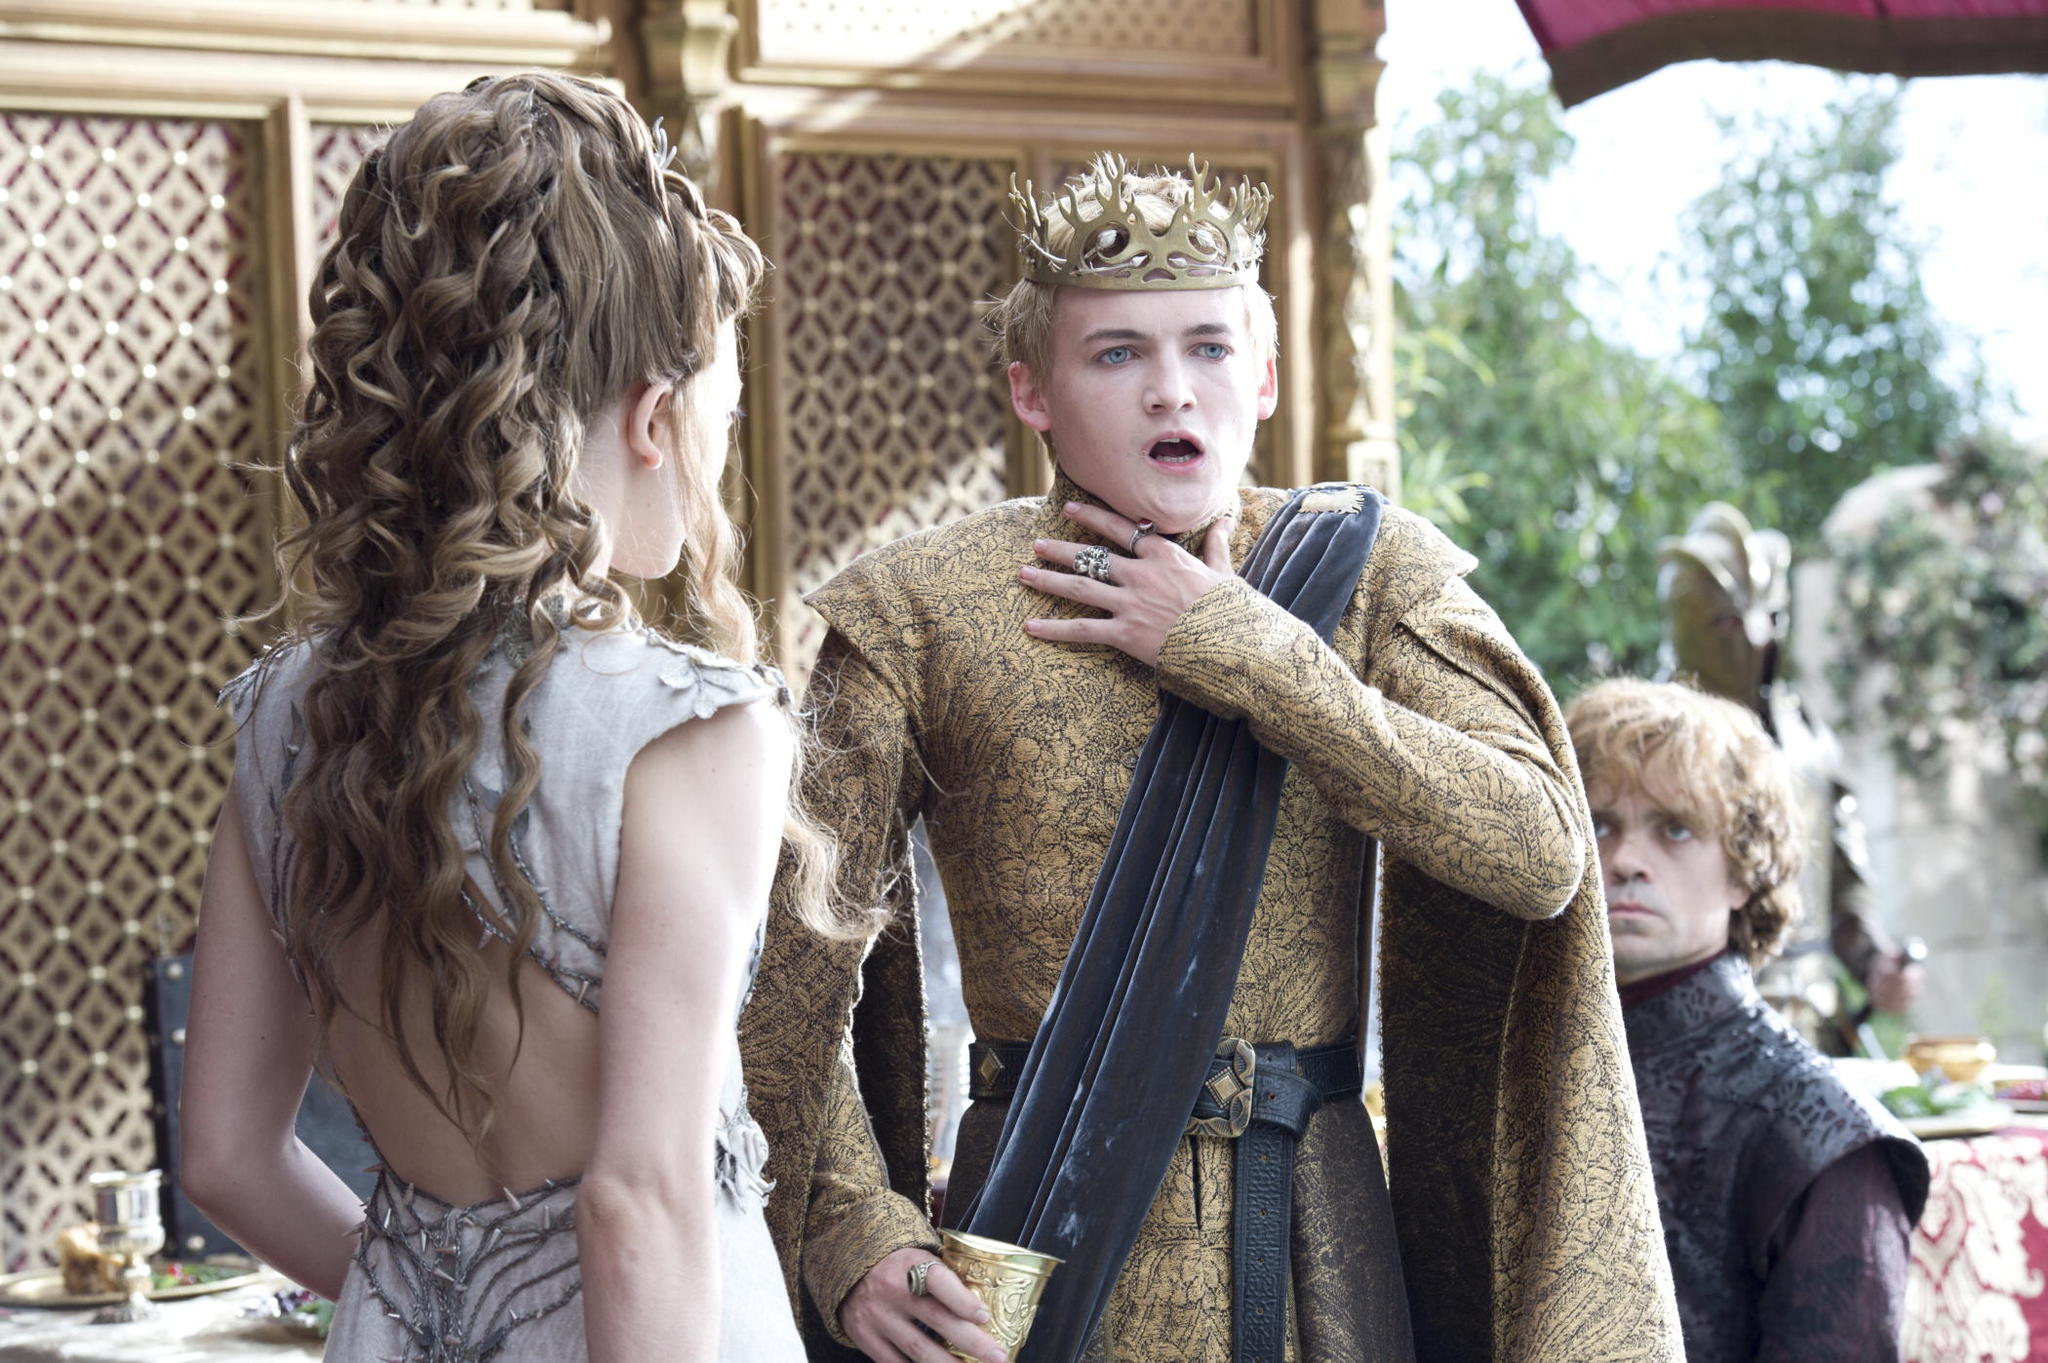 These 15 Brain Teasers Seem Simple, But How Many Can You Solve? Joffrey Baratheon